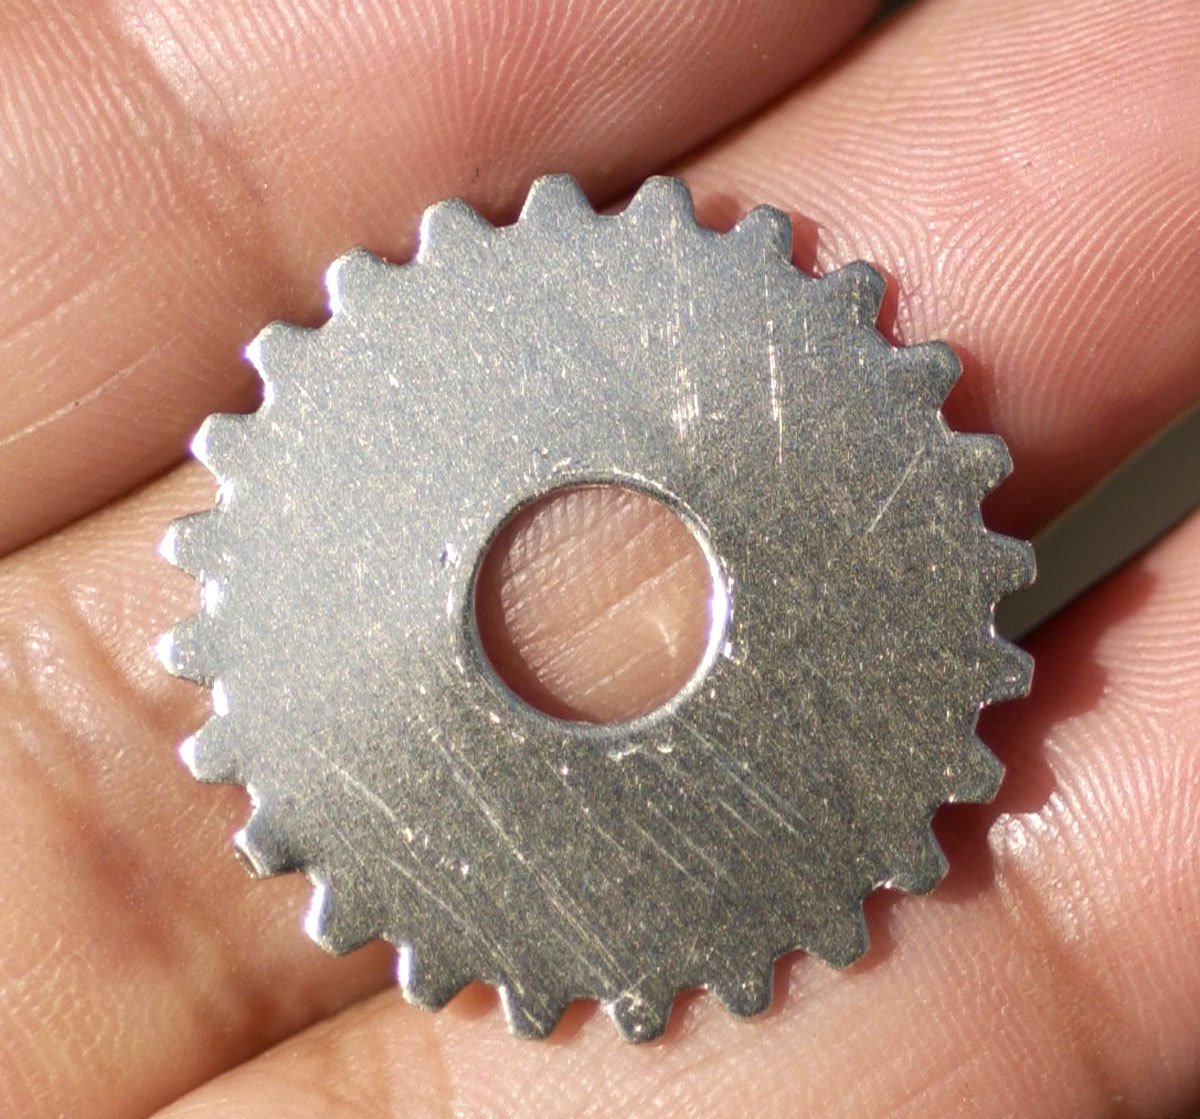 Nickel Silver 25mm Gear Cog Blanks with 6.8mm 24g Cutout for Stamping Texturing Polished Blanks Jewelry Making